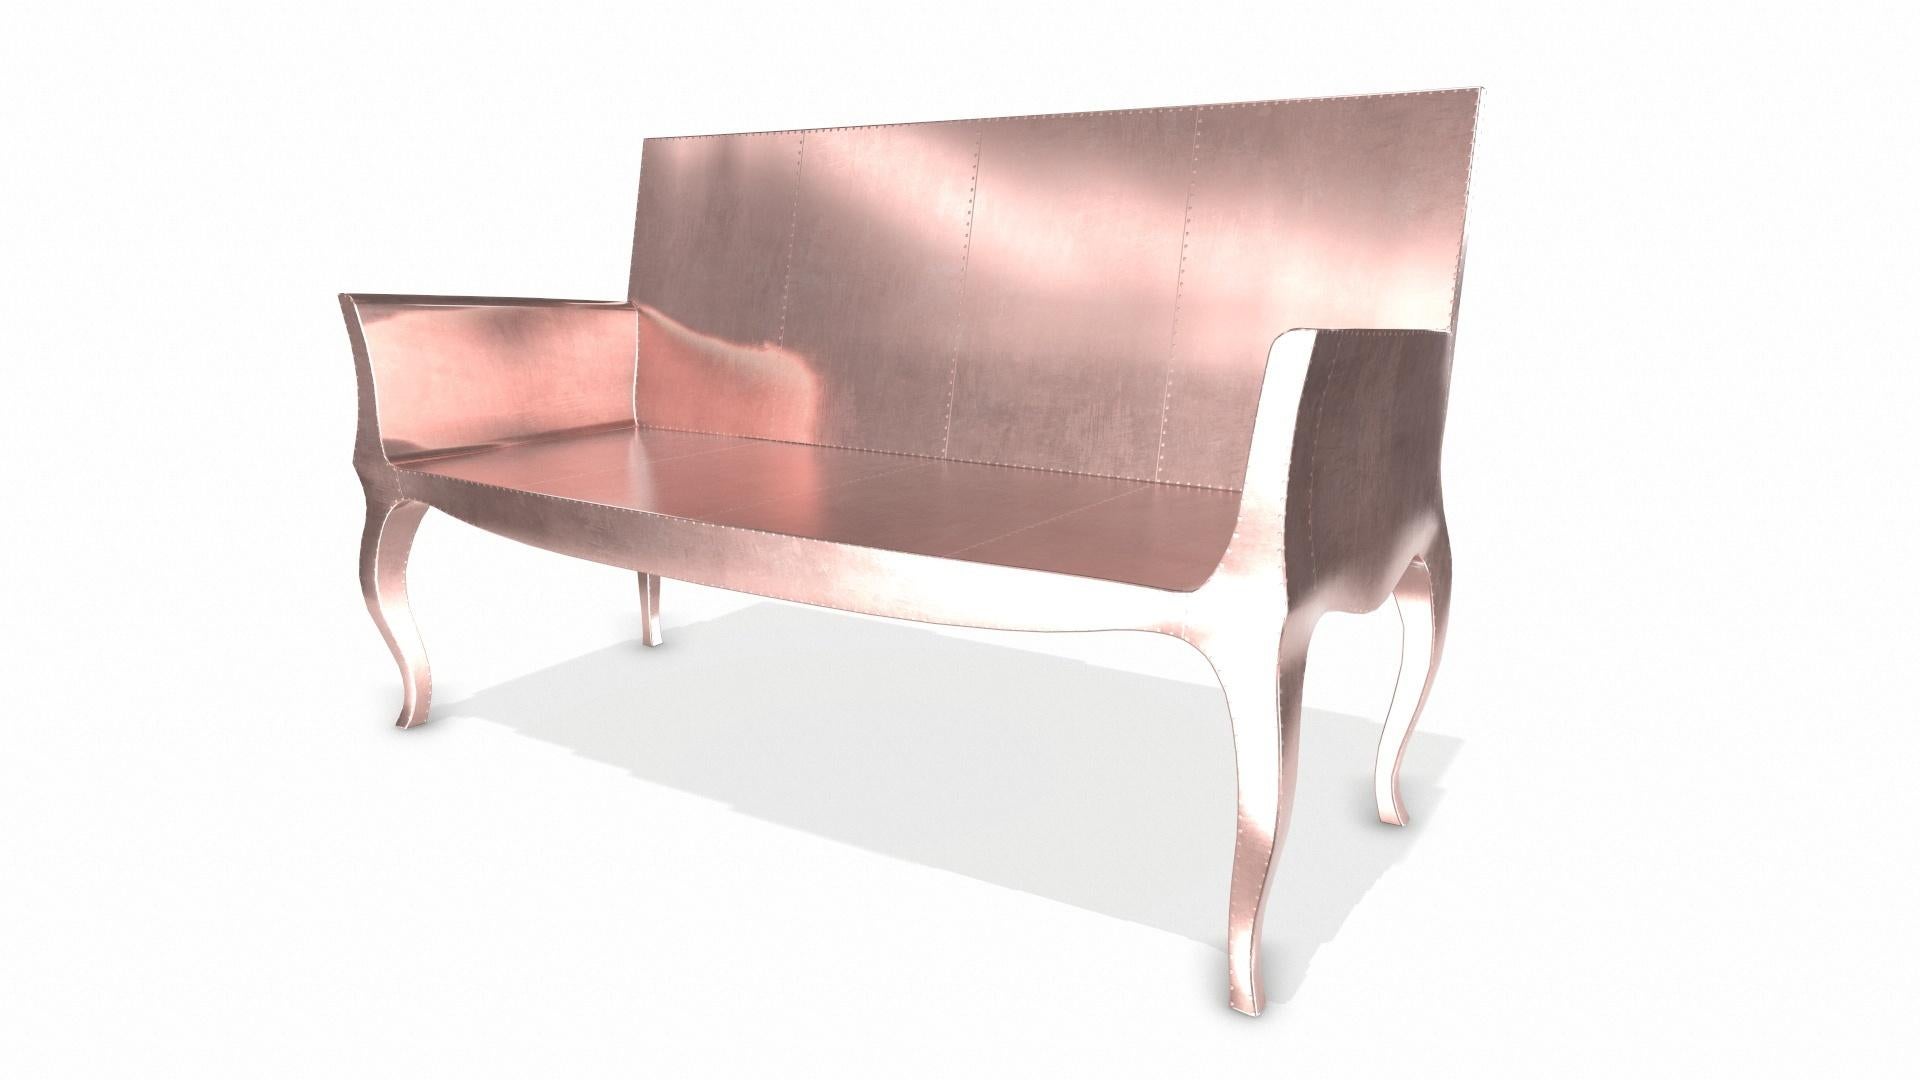 American Louise Settee Art Deco Lounge Chairs in Smooth Copper by Paul Mathieu  For Sale